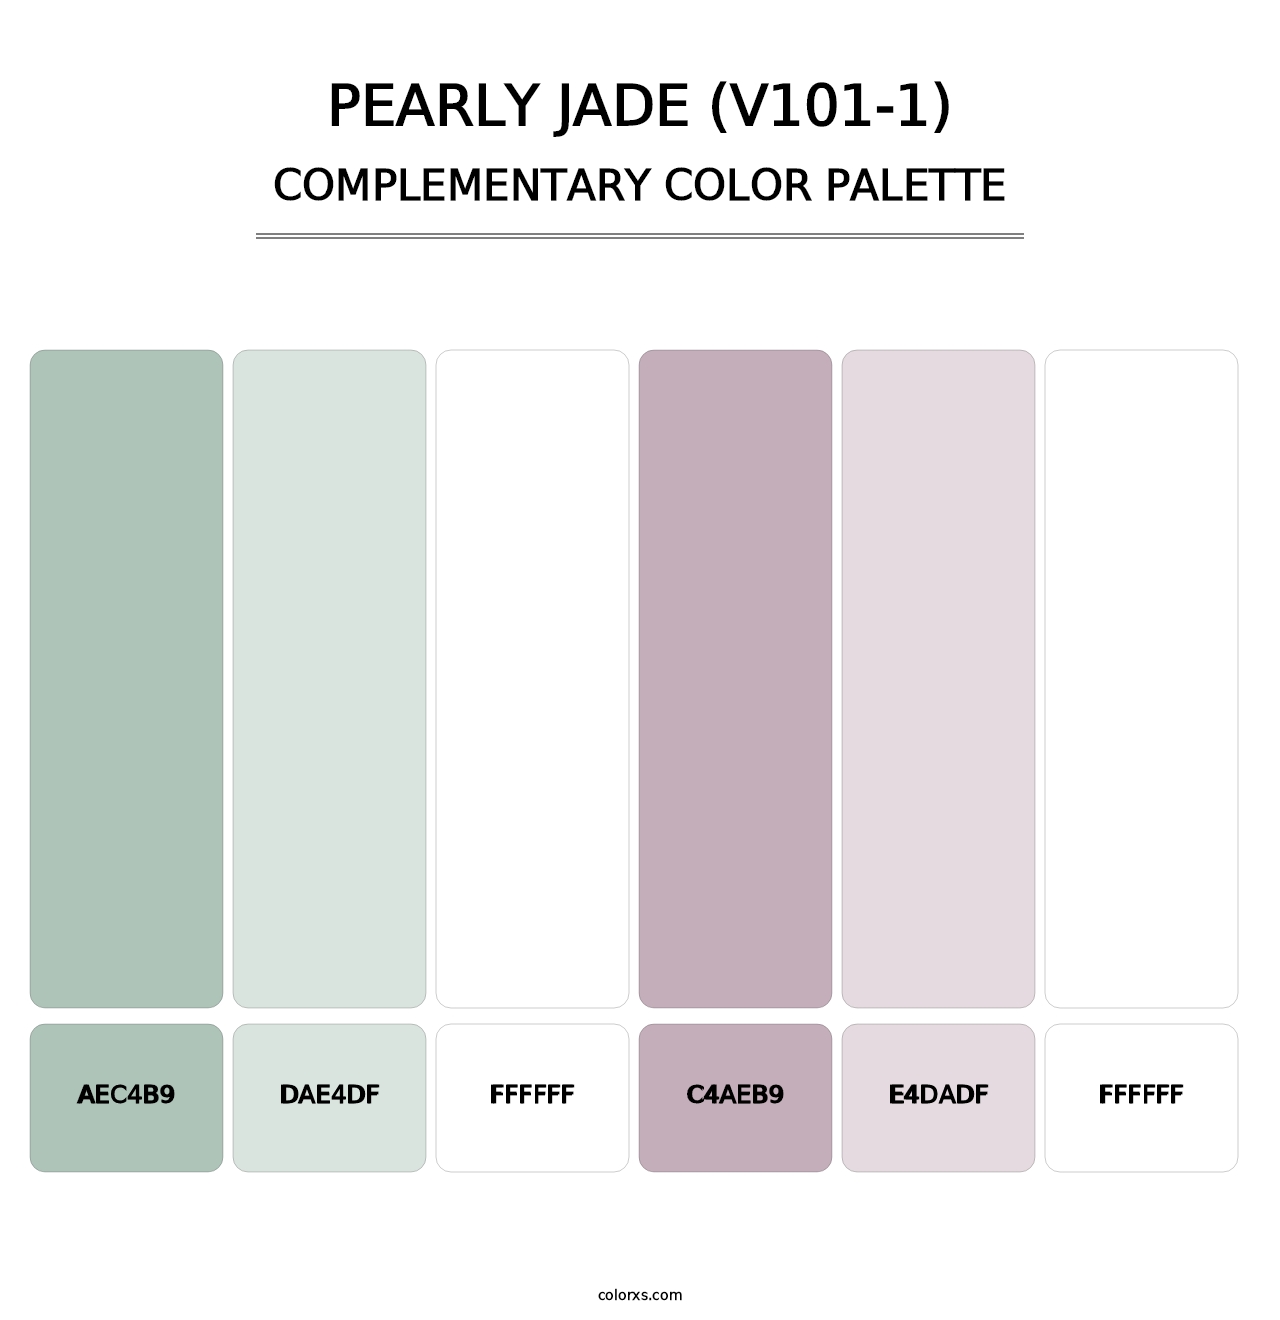 Pearly Jade (V101-1) - Complementary Color Palette